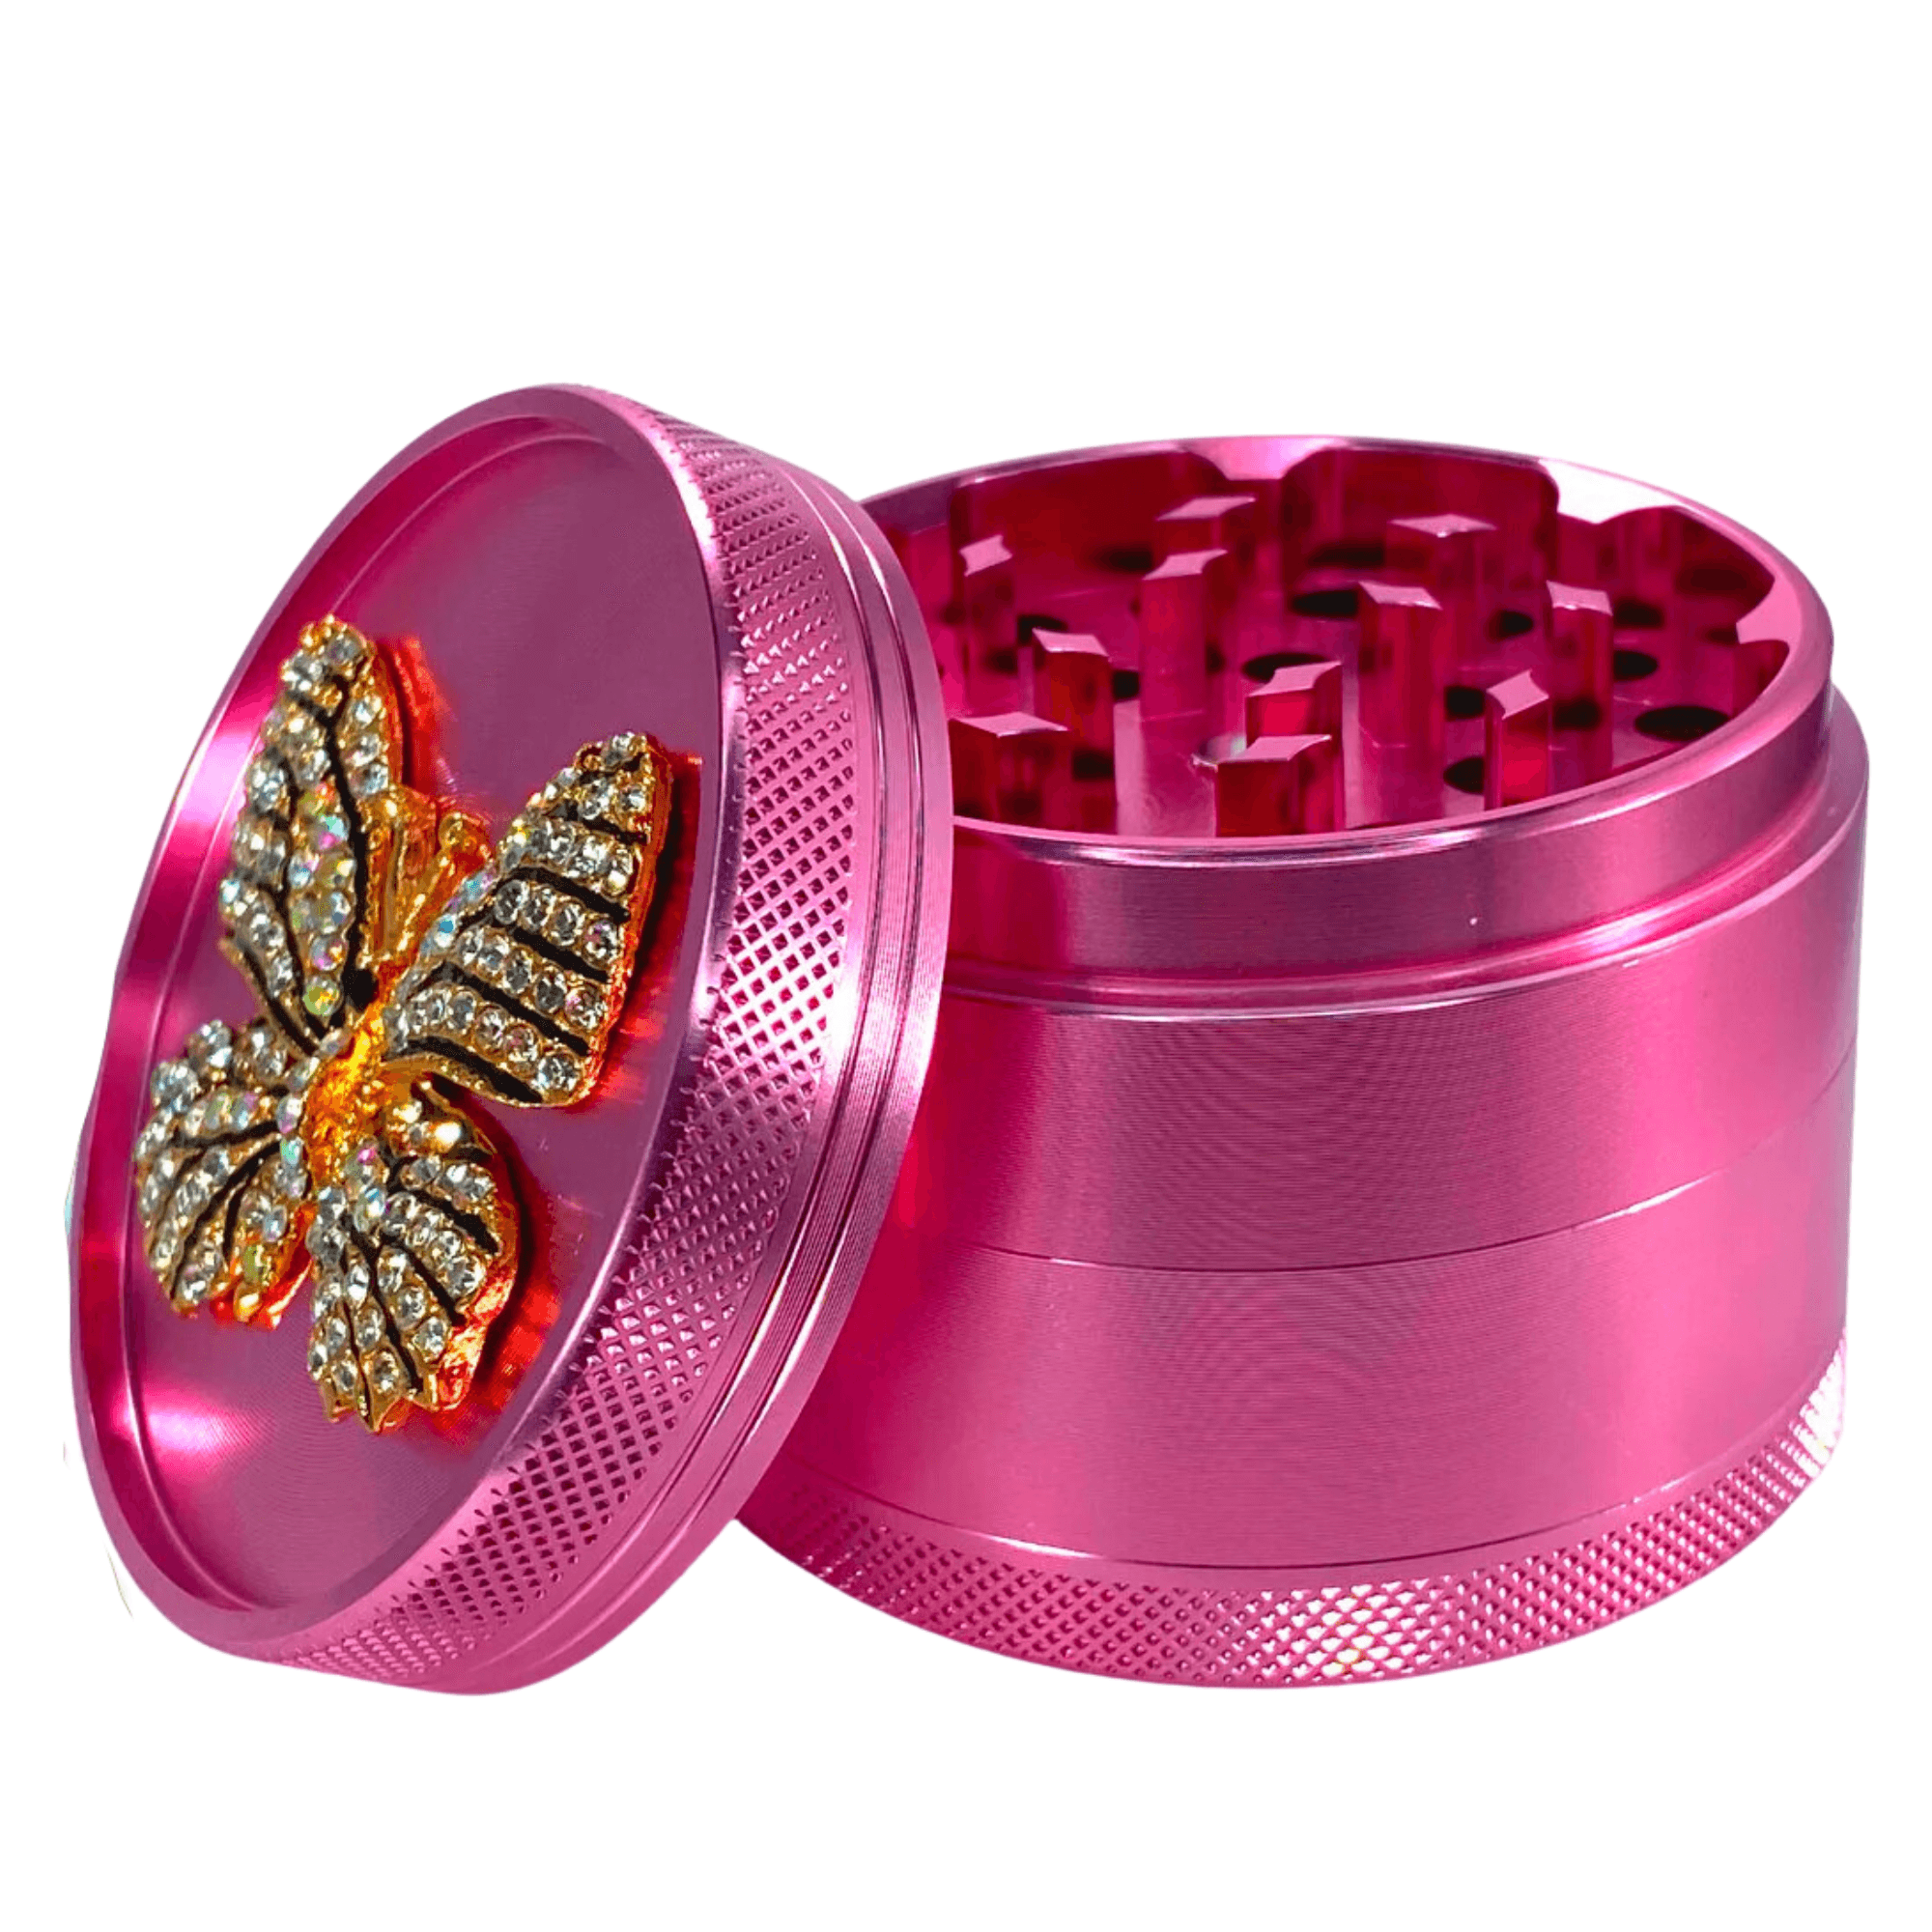 Butterfly herb Grinder